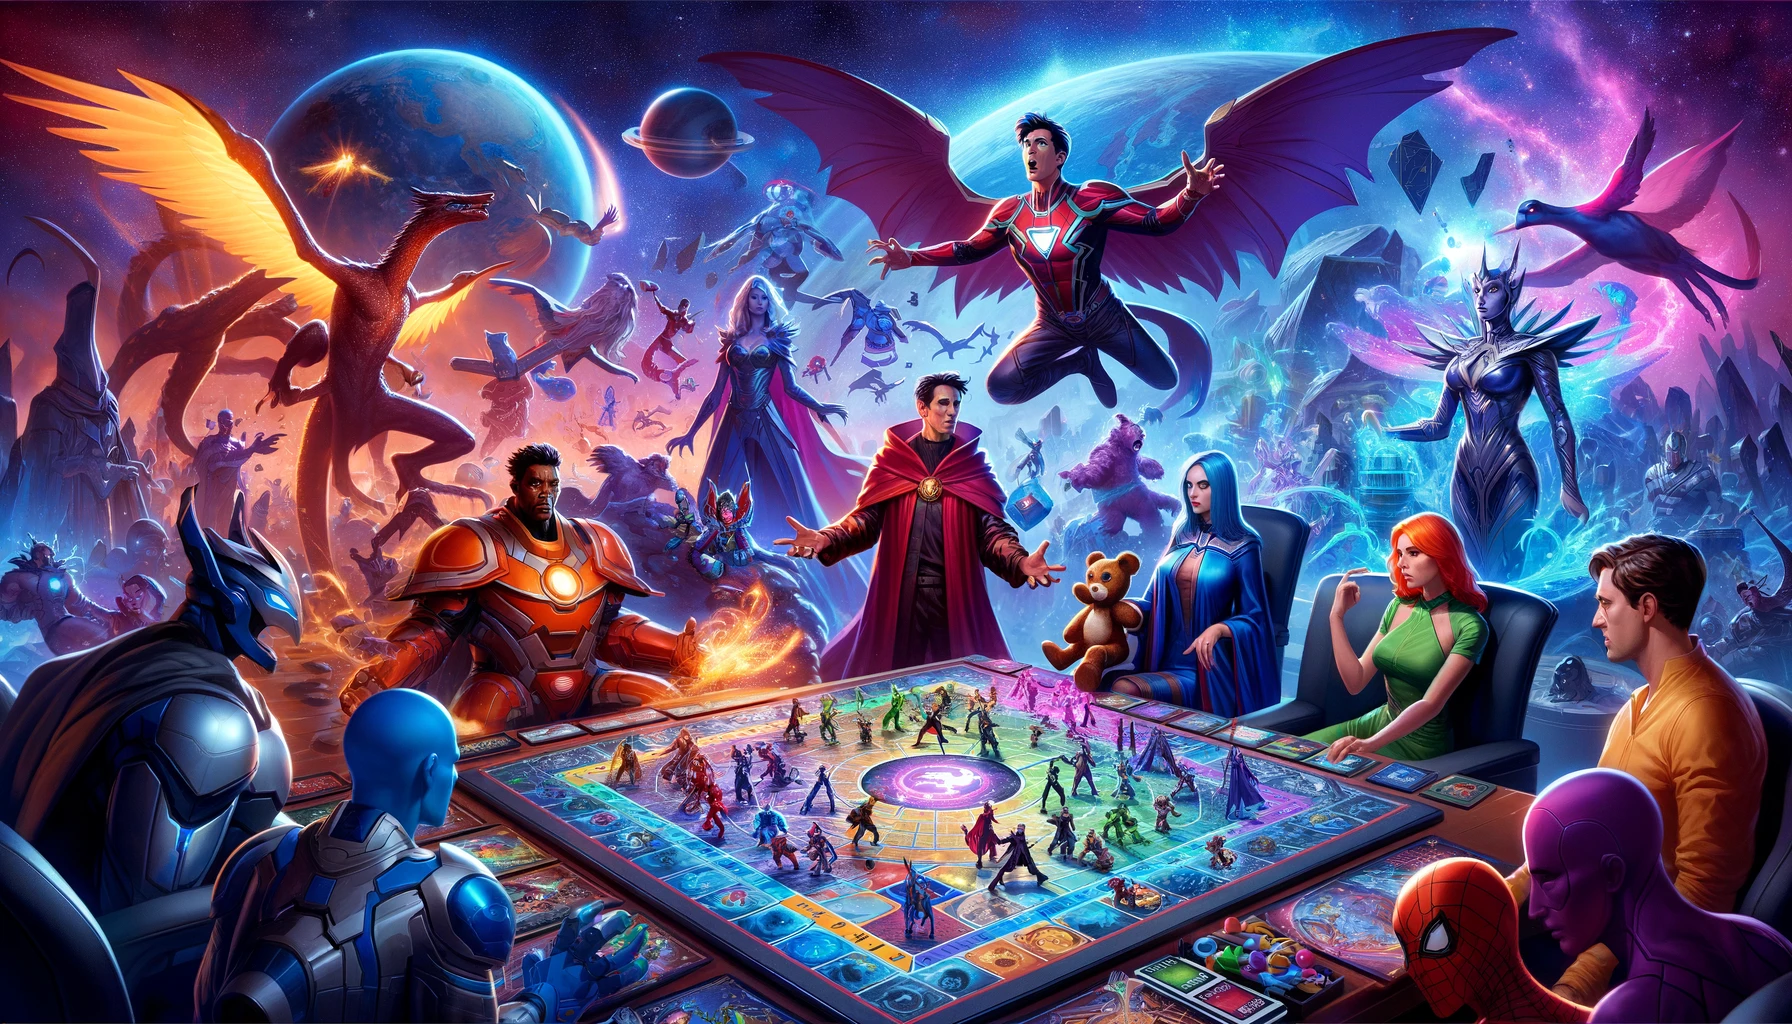 A vibrant, high-color-depth, wide-format image featuring characters from Marvel Snap's Pool 1 in a strategic board game setting. Characters are depicted in a mix of fantasy and sci-fi styles, engaged in strategic planning and dynamic poses against an imaginative, otherworldly background with futuristic and magical elements. Additionally, a newcomer looks around in awe at everything happening around them, appearing curious and fascinated.